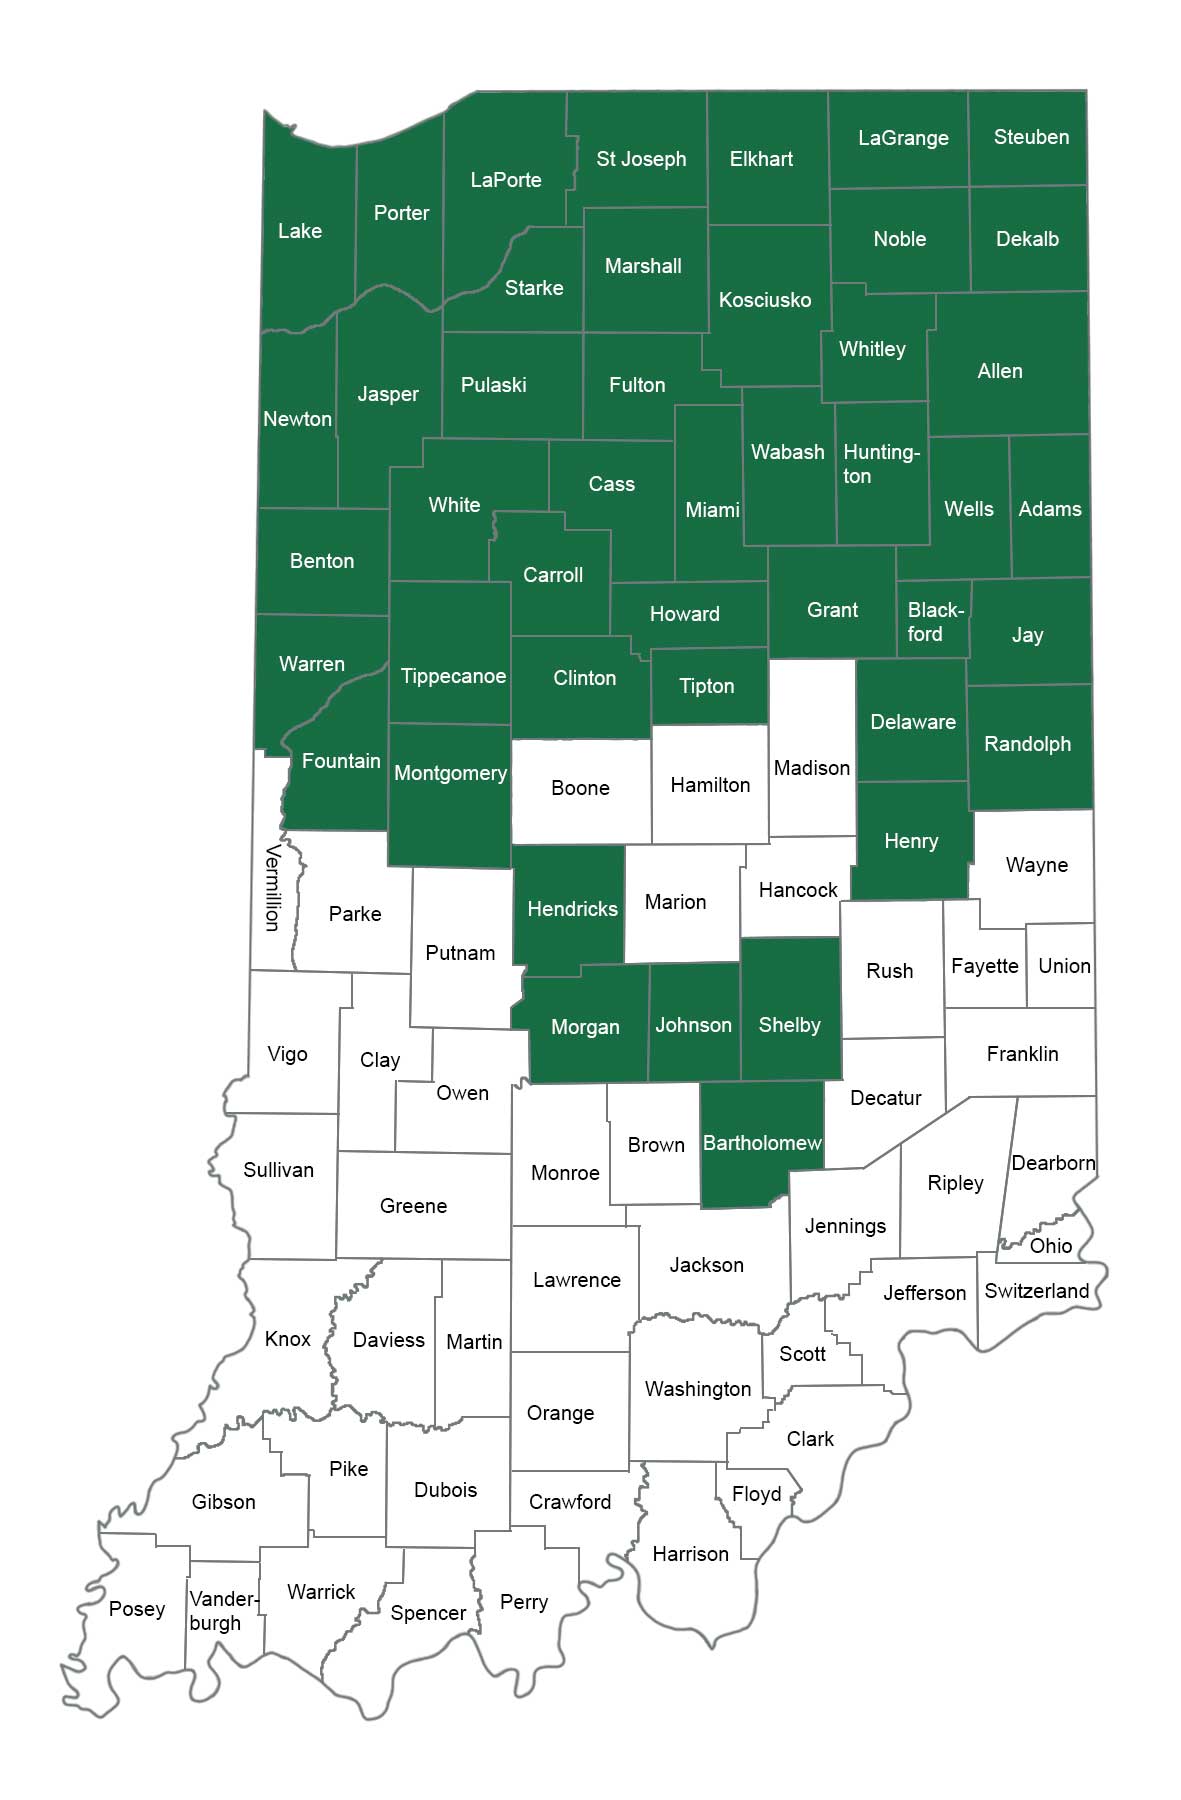 Images of Indiana with listed counties selected